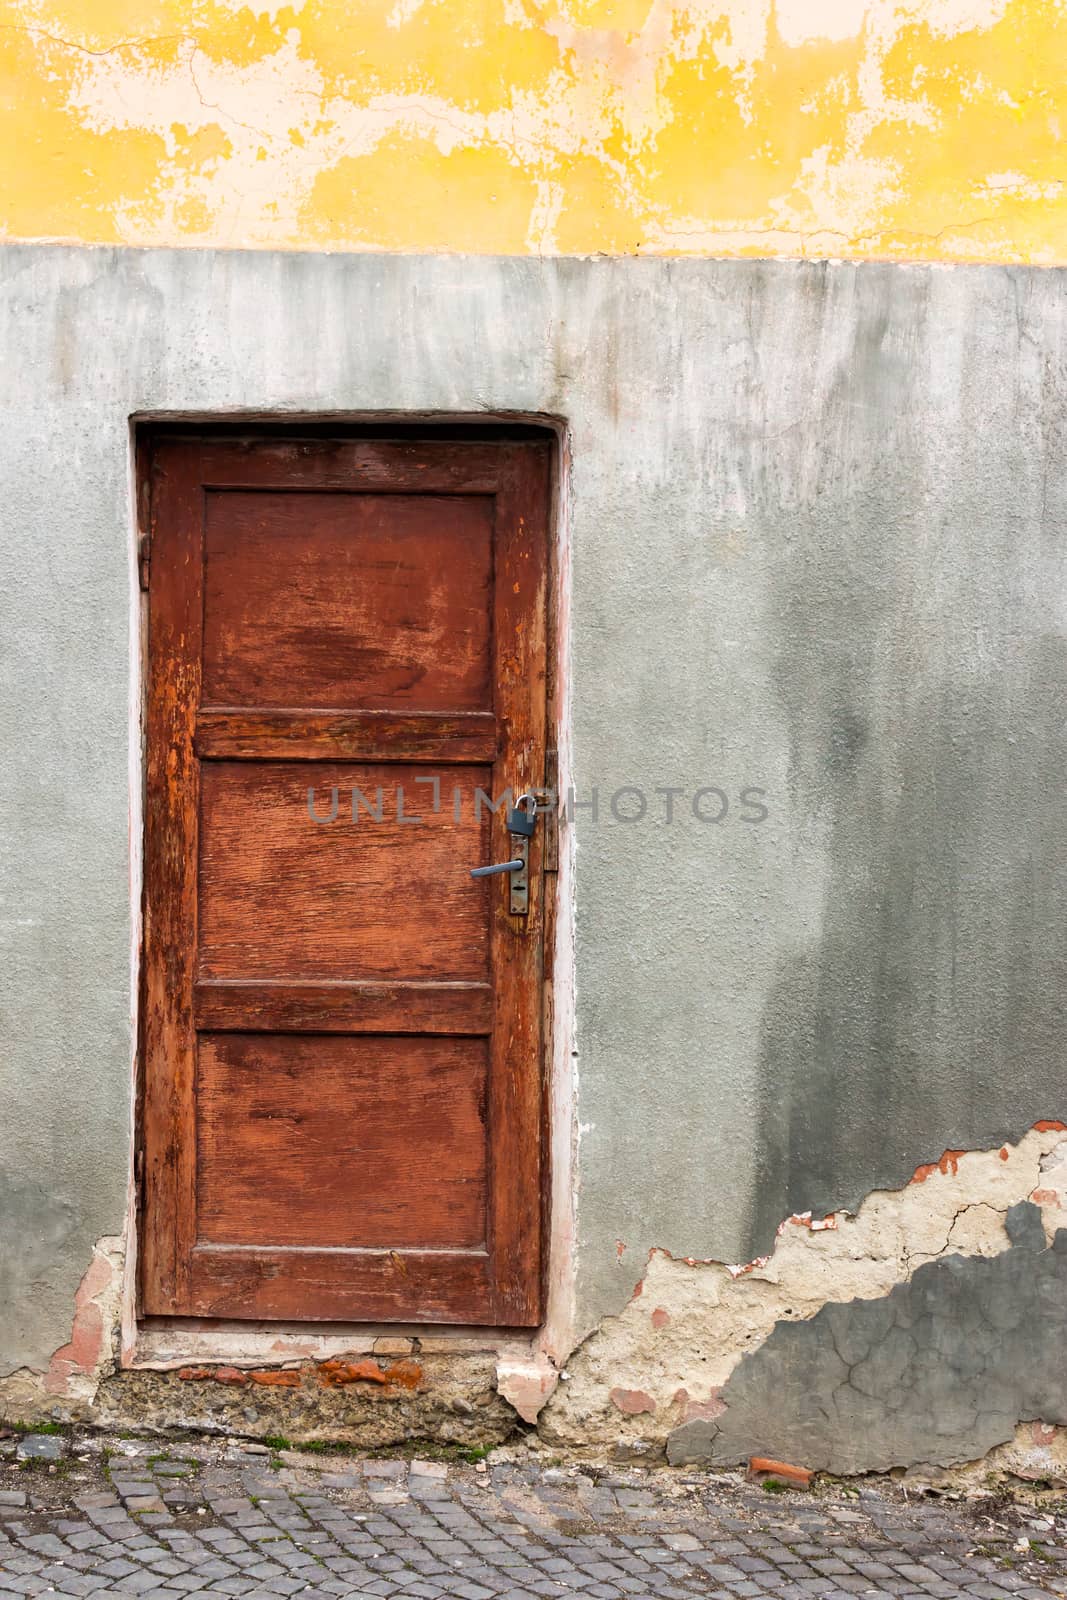 old wooden door frame with lock granary   on the old cracked wall